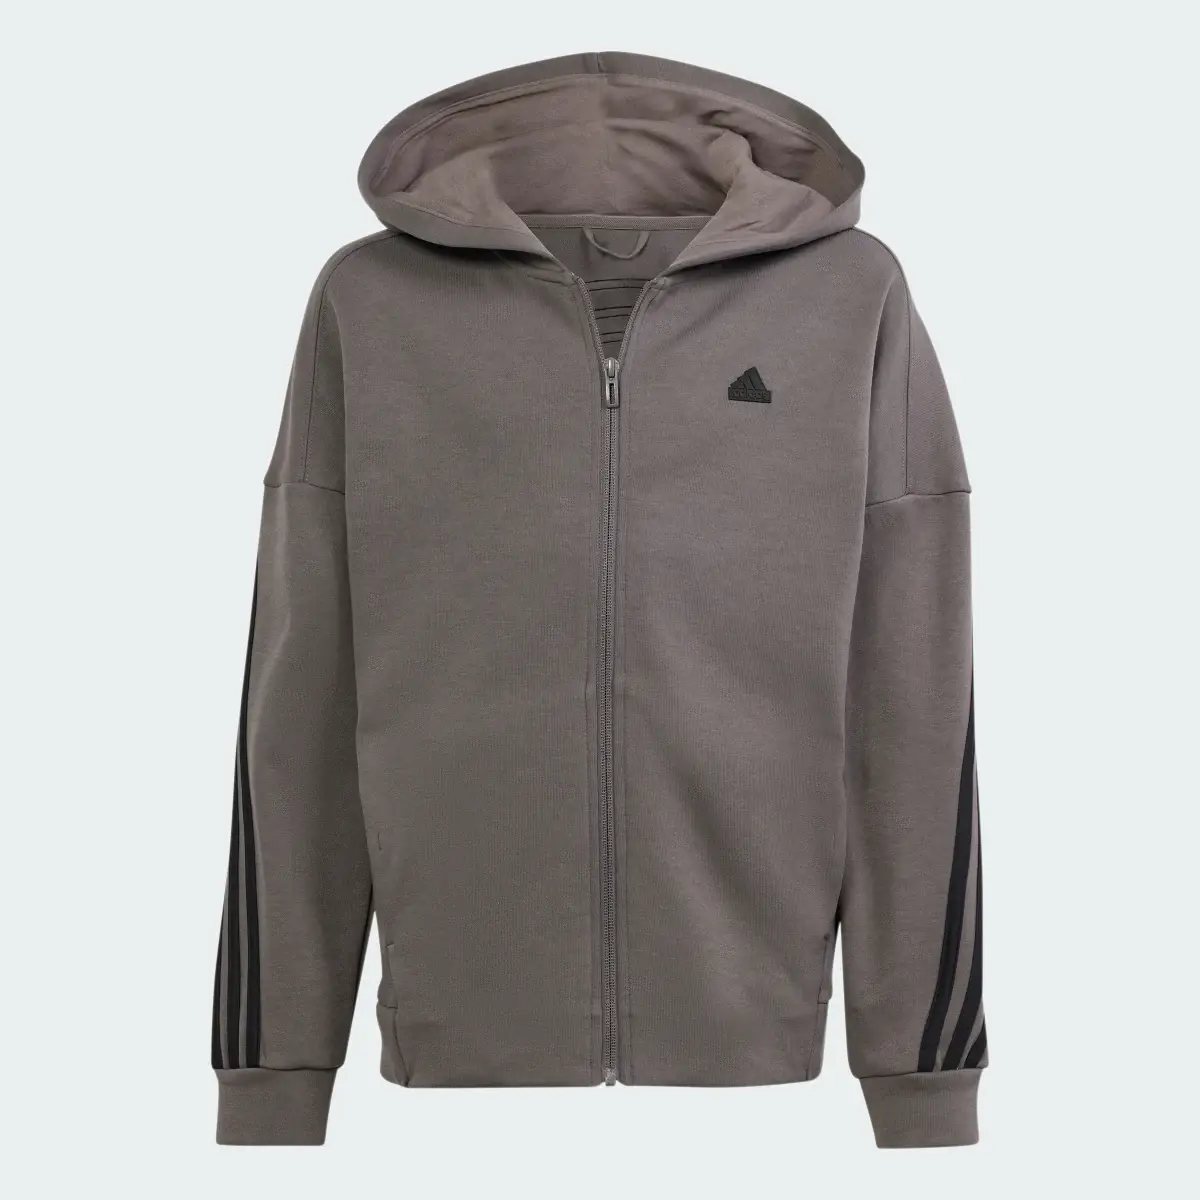 Adidas Future Icons 3-Stripes Full-Zip Hooded Track Top. 1